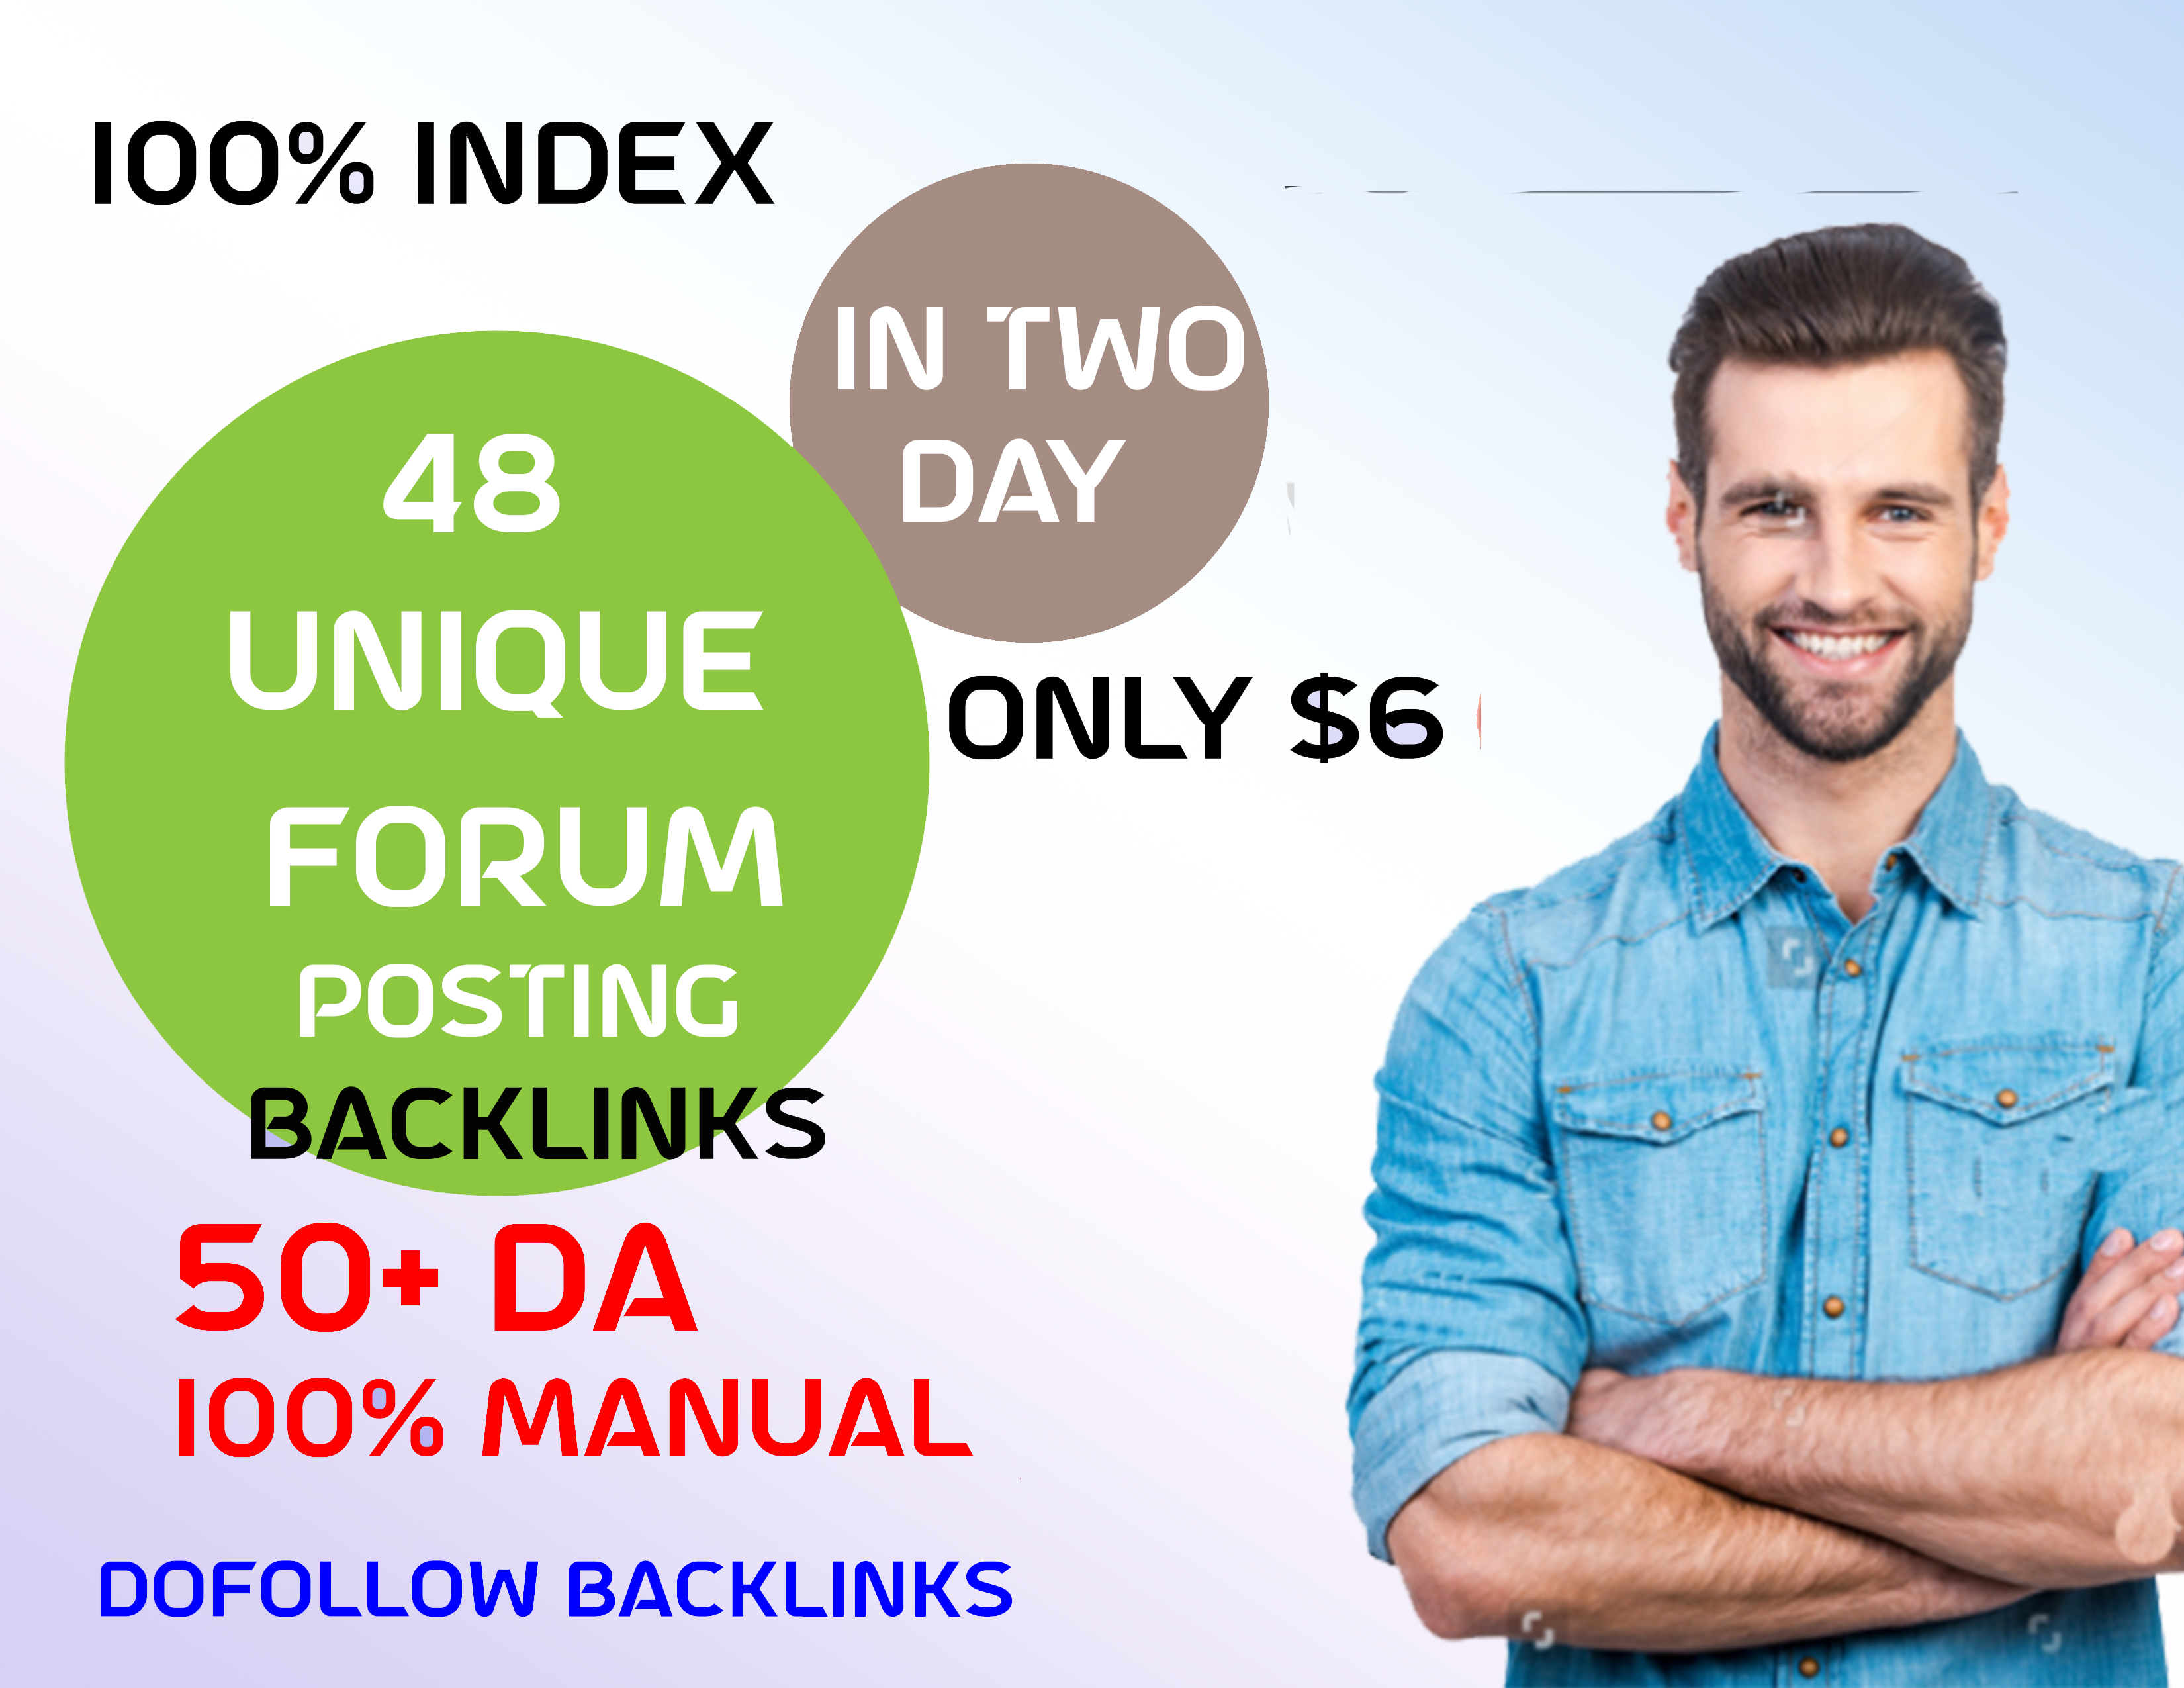 Paypal - Provide Unique dofillow 48+Forum Posting Backlinks best for Your seo to rank keywords